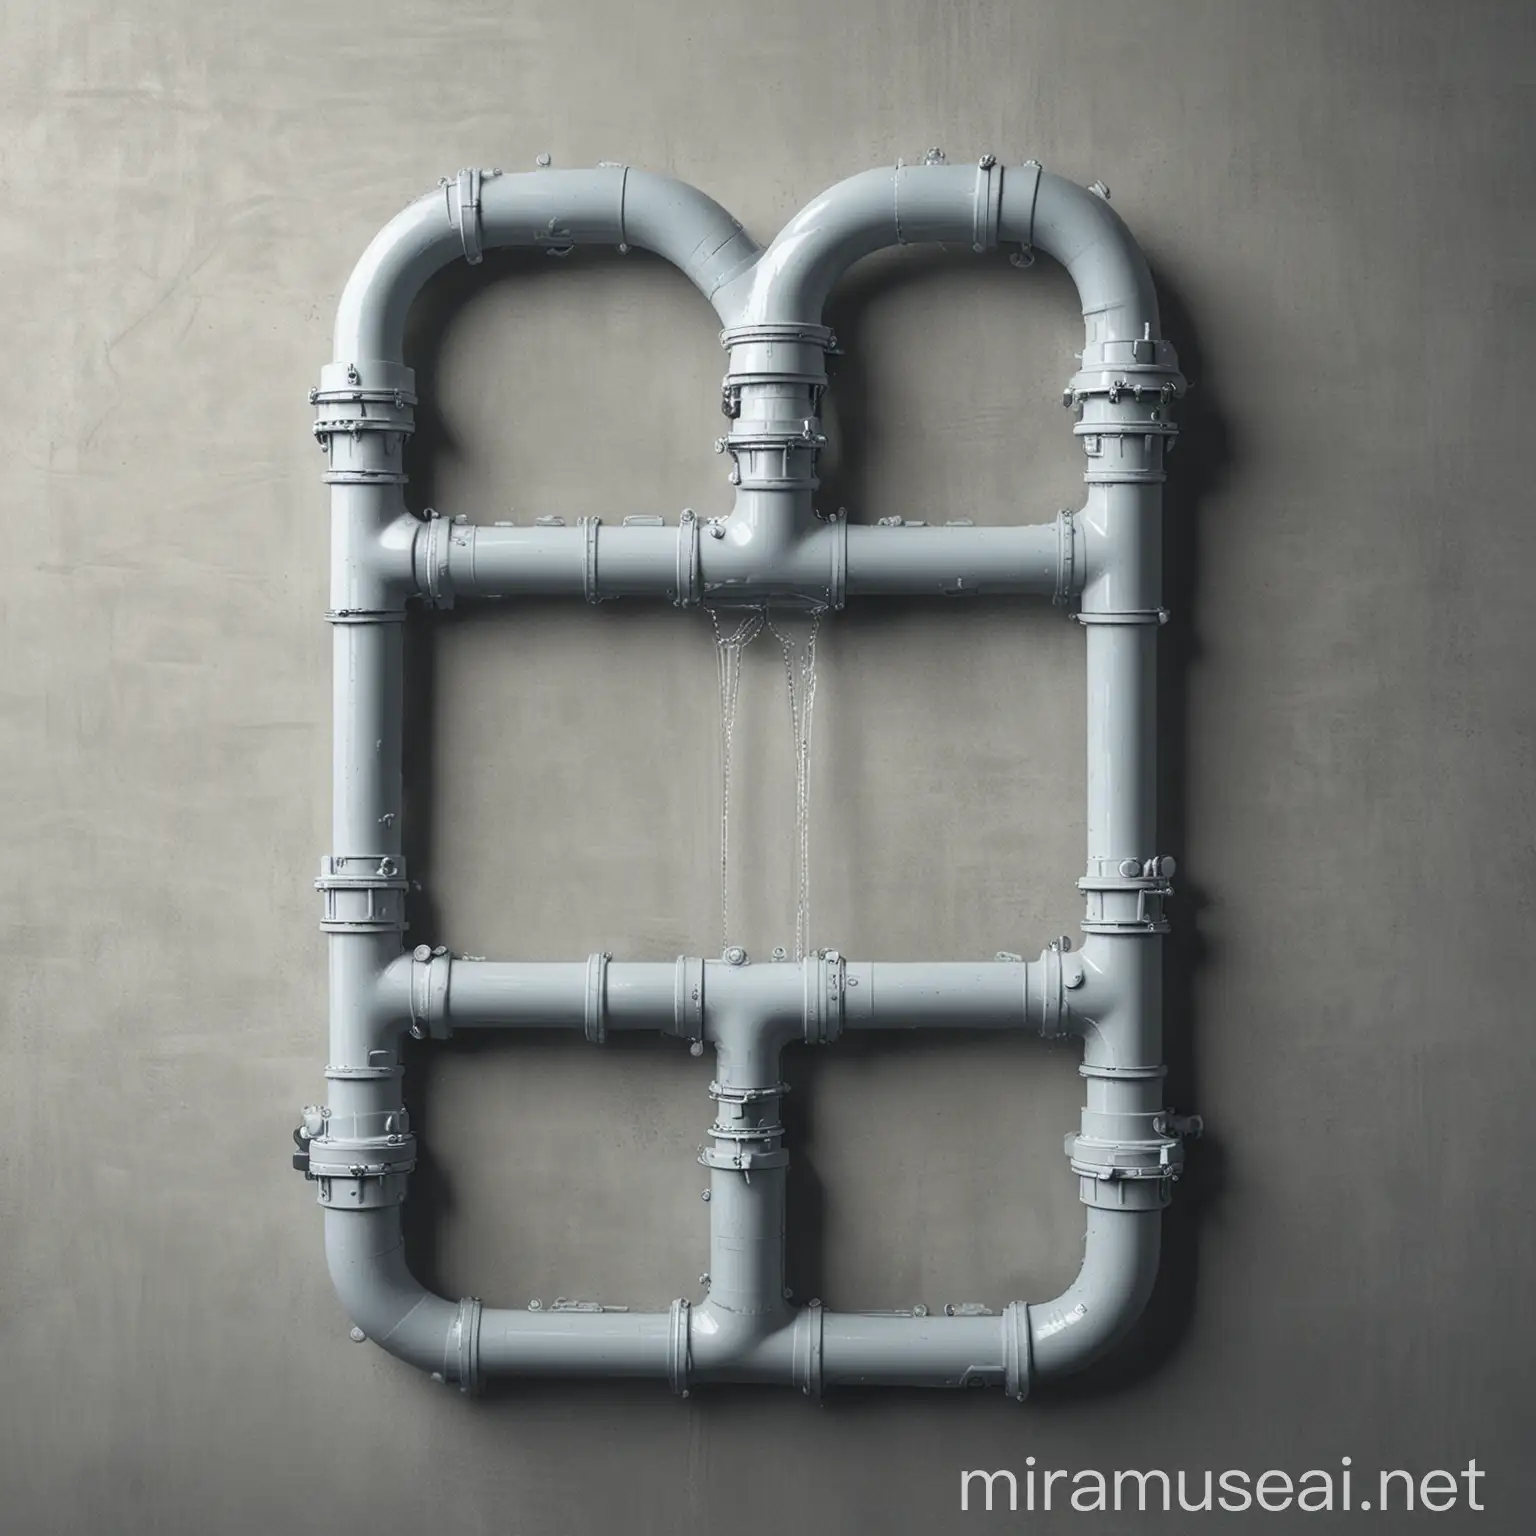 logical connection of water pipes